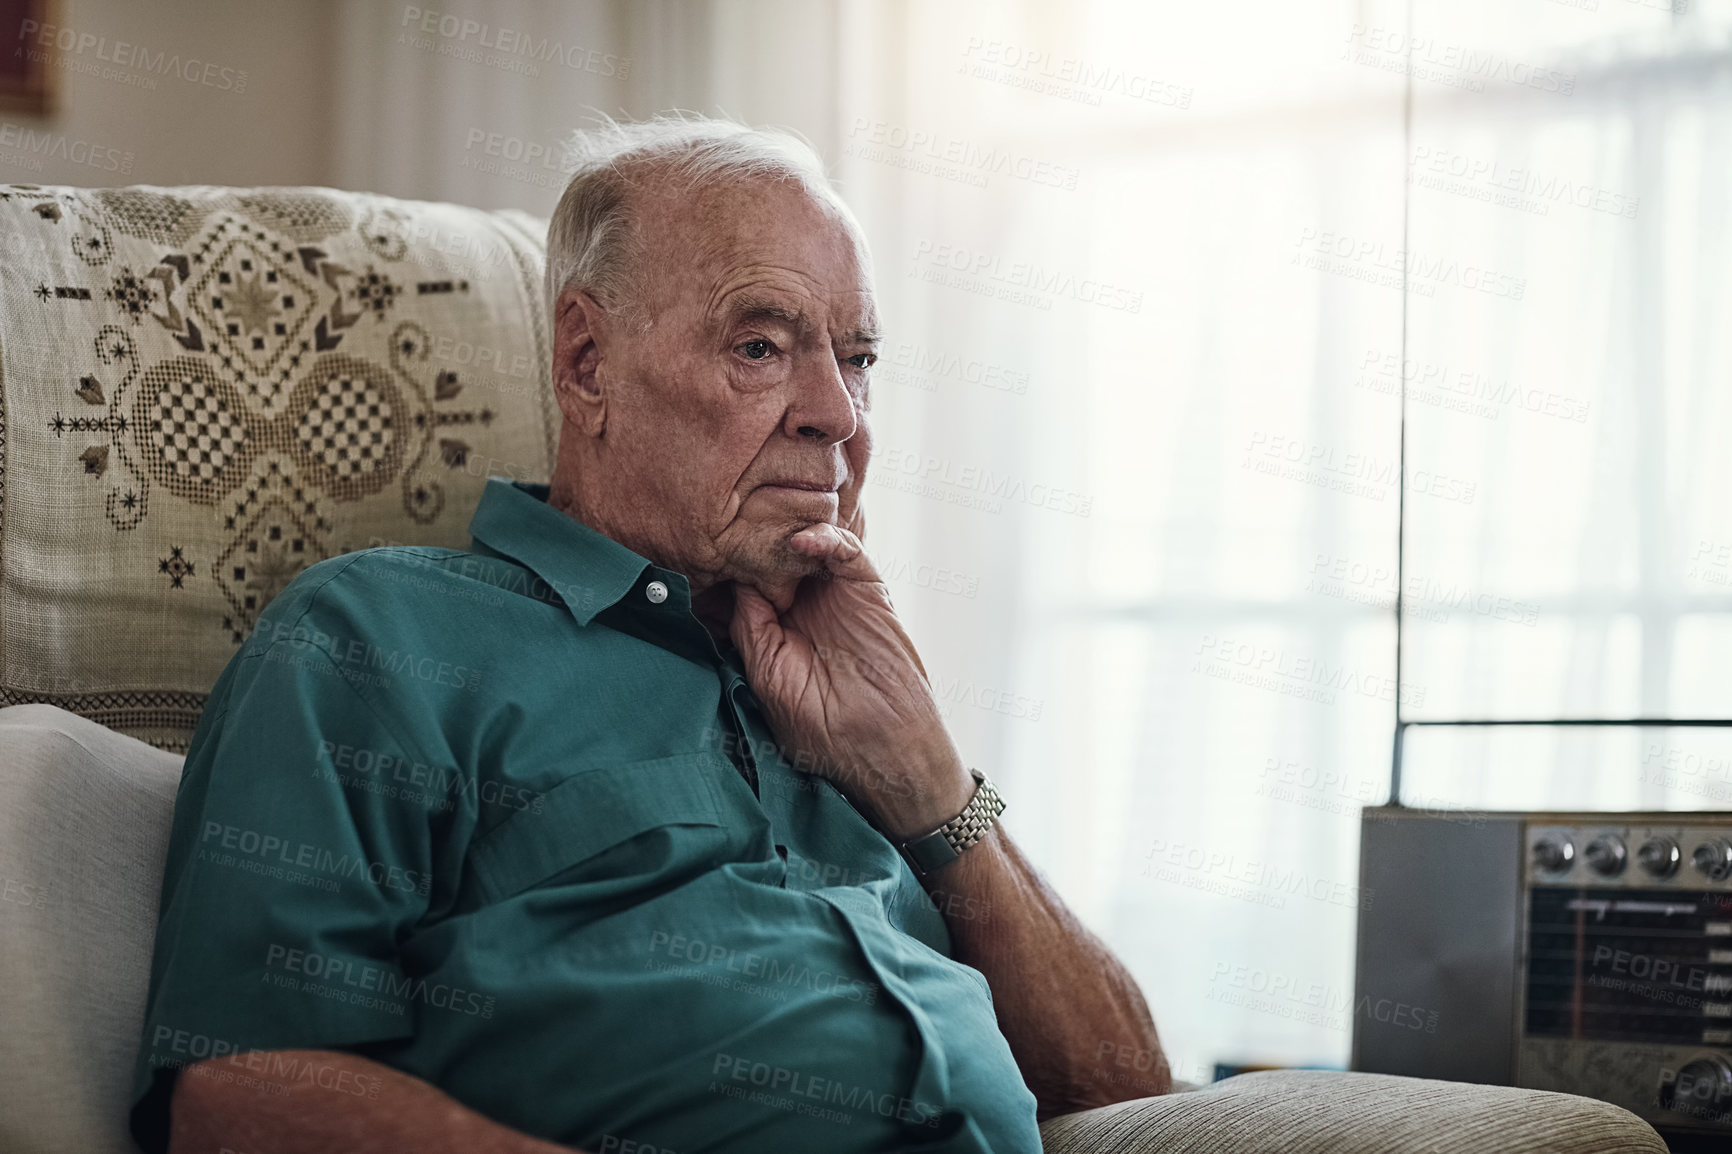 Buy stock photo Cropped shot of a senior man sitting by himself in a living room